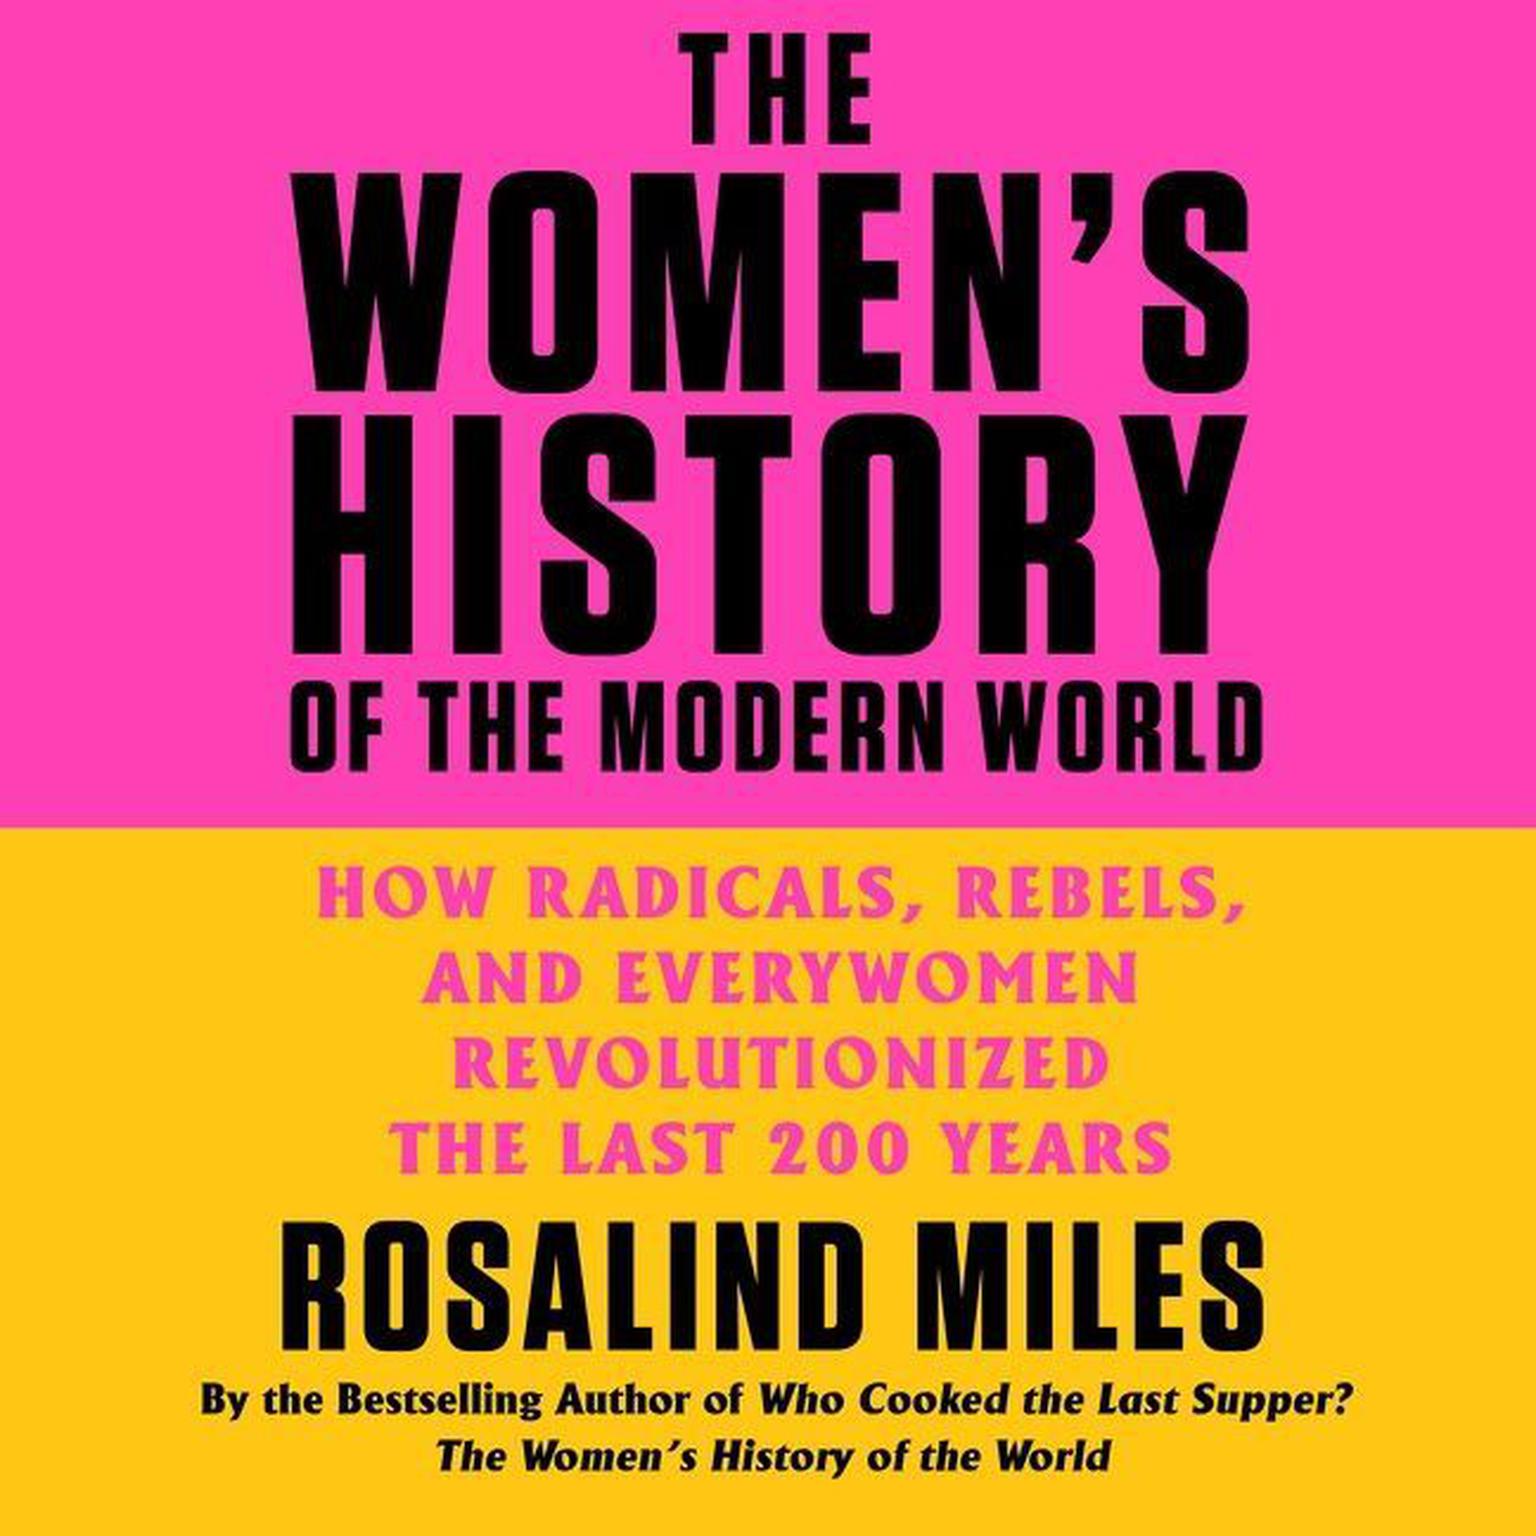 The Womens History of the Modern World: How Radicals, Rebels, and Everywomen Revolutionized the Last 200 Years Audiobook, by Rosalind Miles